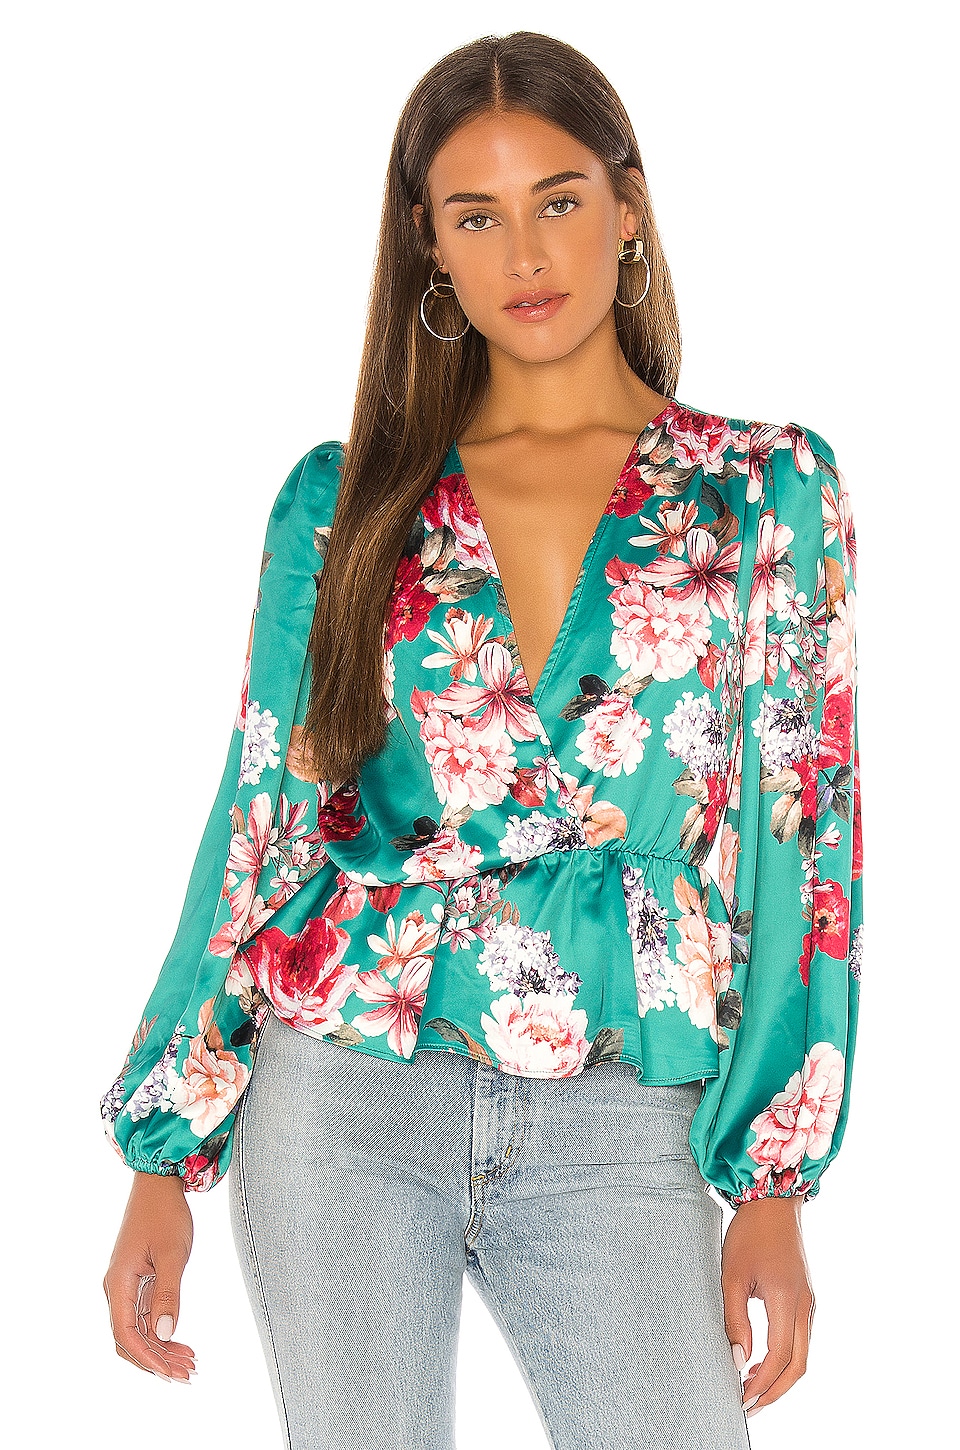 NBD Mary Katherine Blouse in Teal Floral | REVOLVE